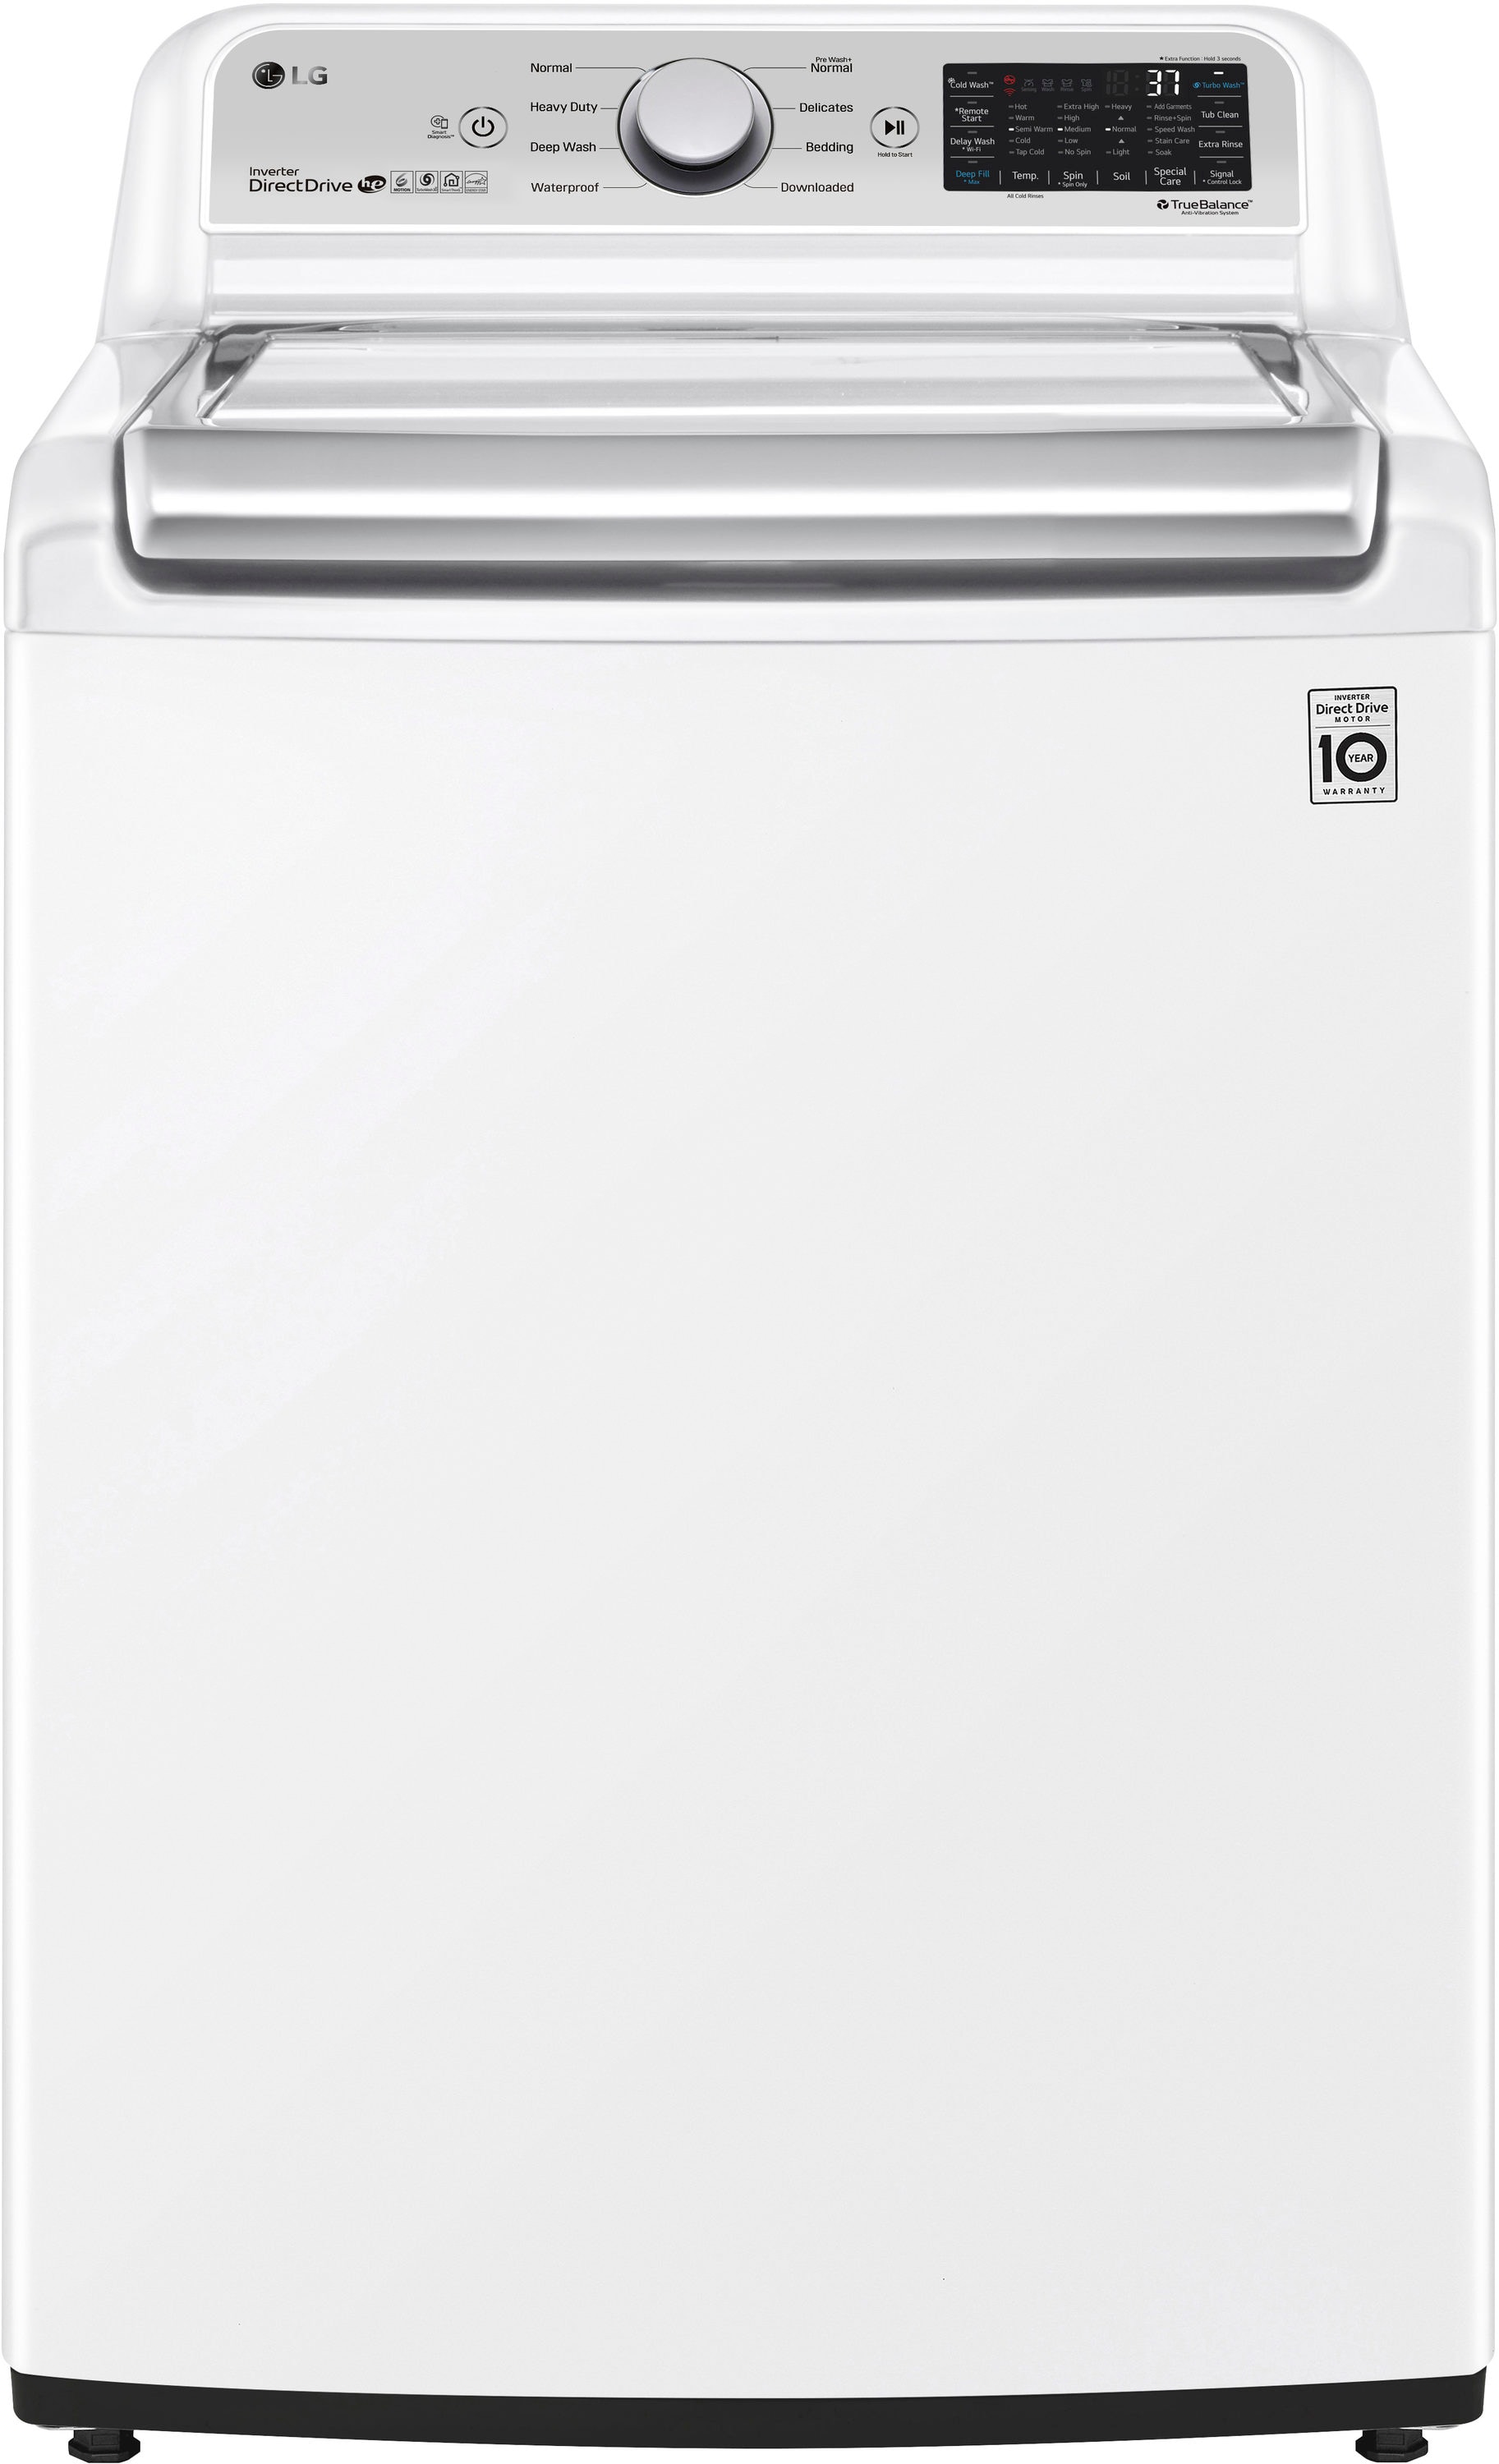 TurboWash 3D Wi-Fi Enabled 4.8-cu ft Agitator Top-Load Washer (White) ENERGY STAR in the Top-Load Washers department at Lowes.com